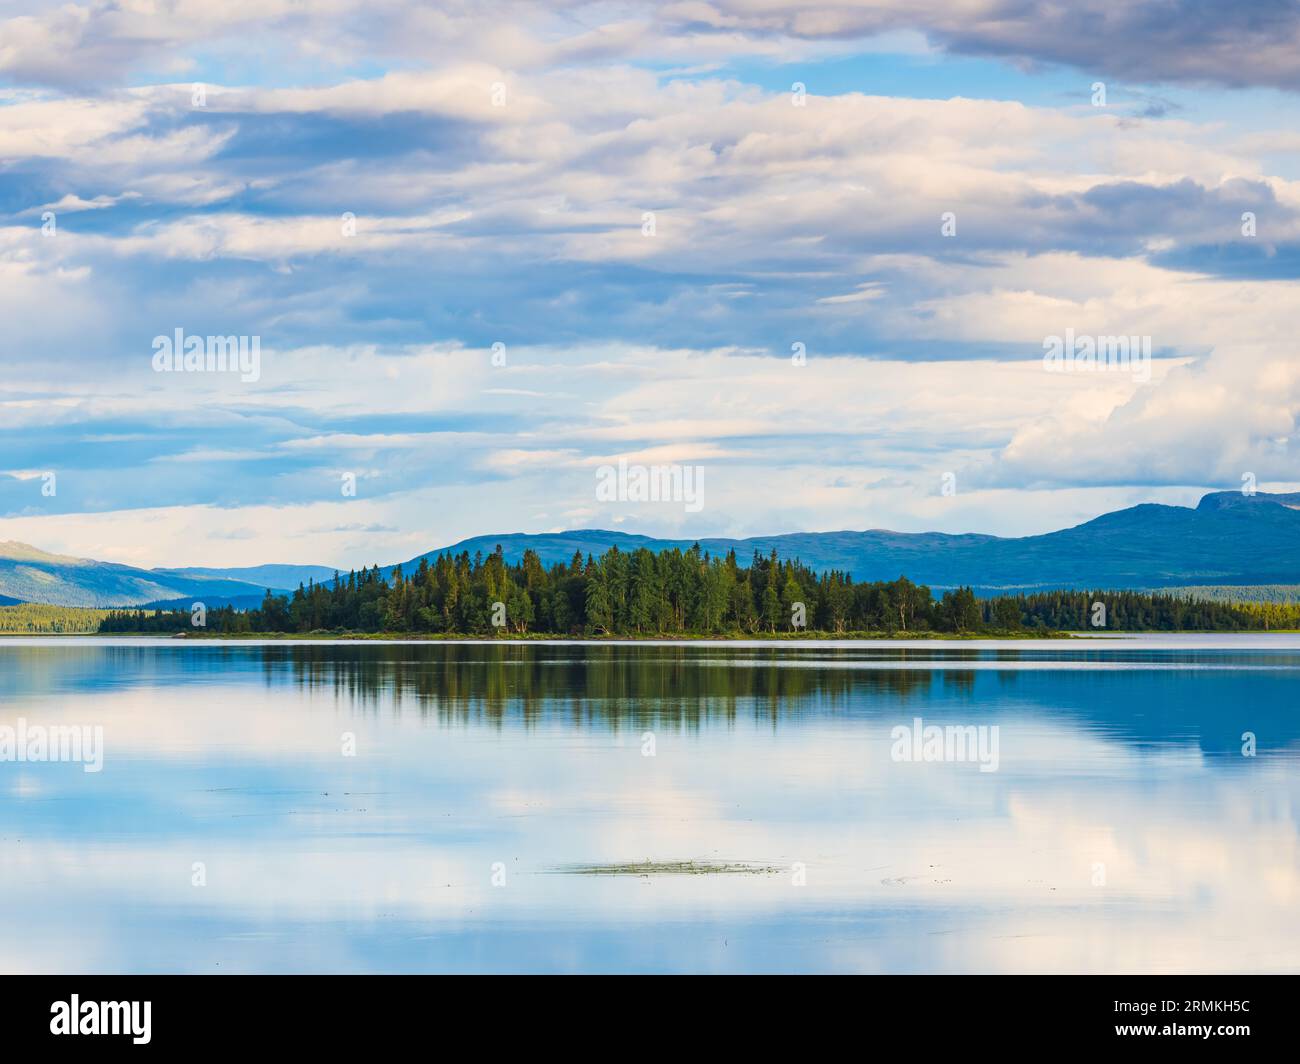 Tranquil nature scene: lake, trees, reflection, Sweden. Stock Photo